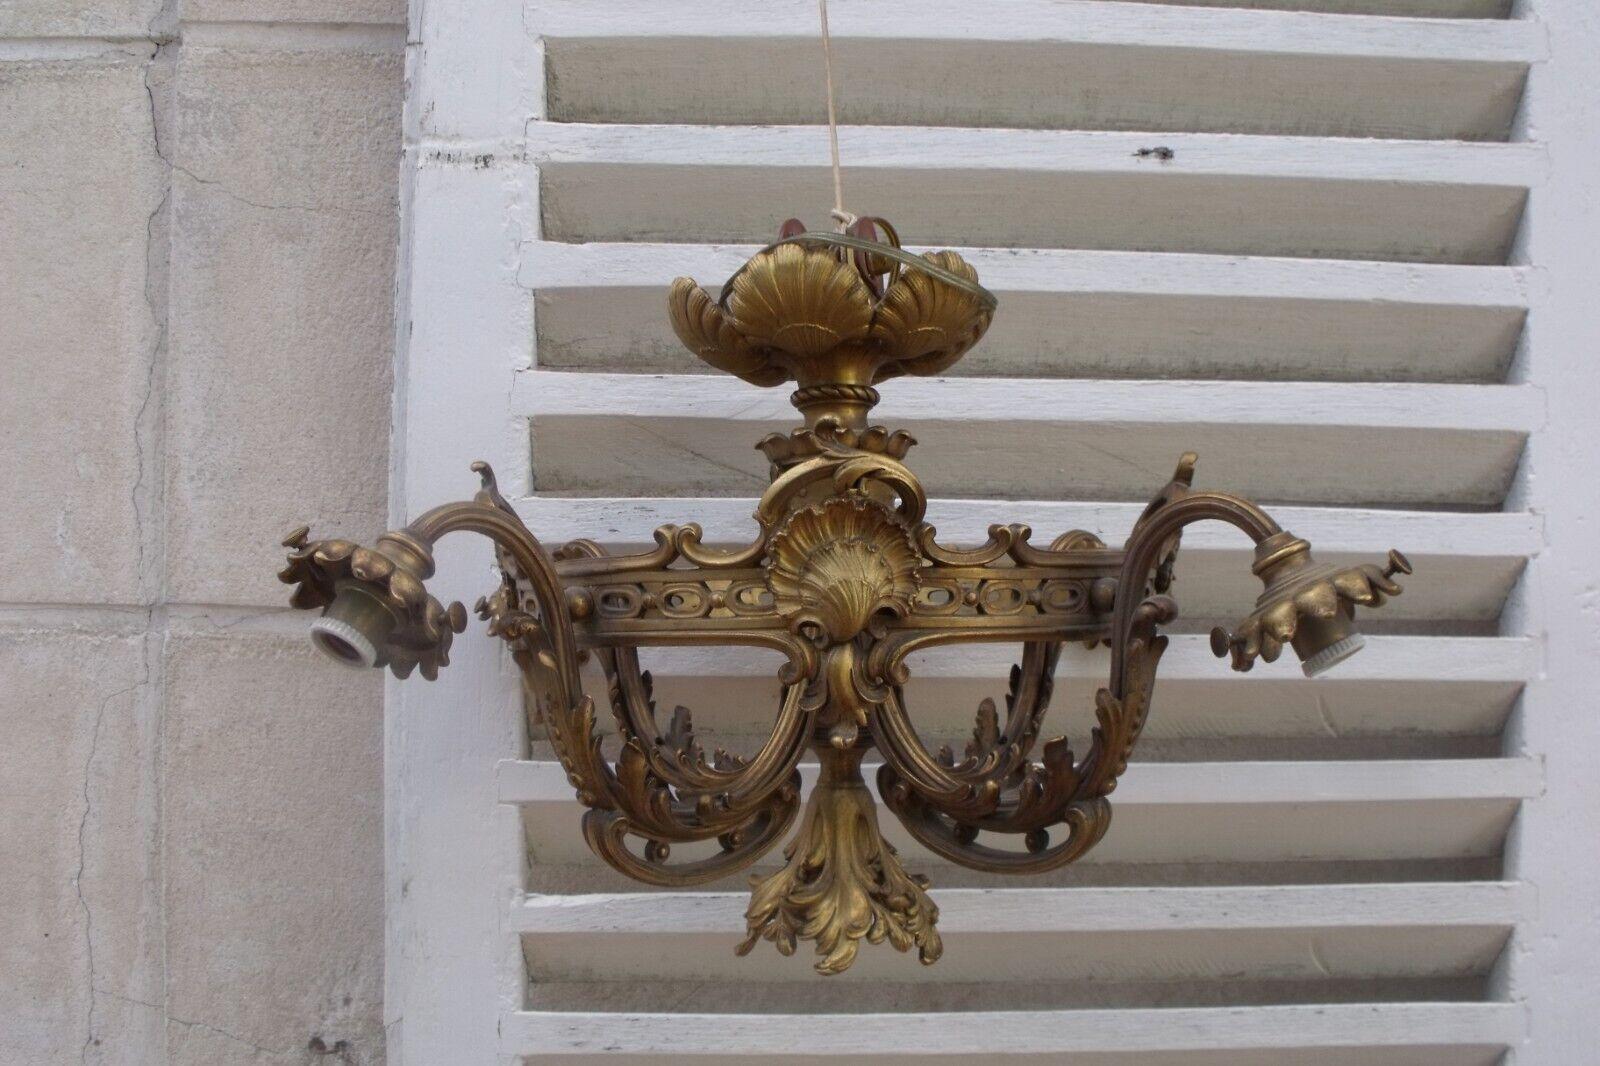 19thc French Louis XVI Rococo Form Gilt Bronze Chandelier Signed by F. Barbedienne. This a truly stunning classic chandelier. Seashell, C Scroll and more Rococo detail. 5 Lights.